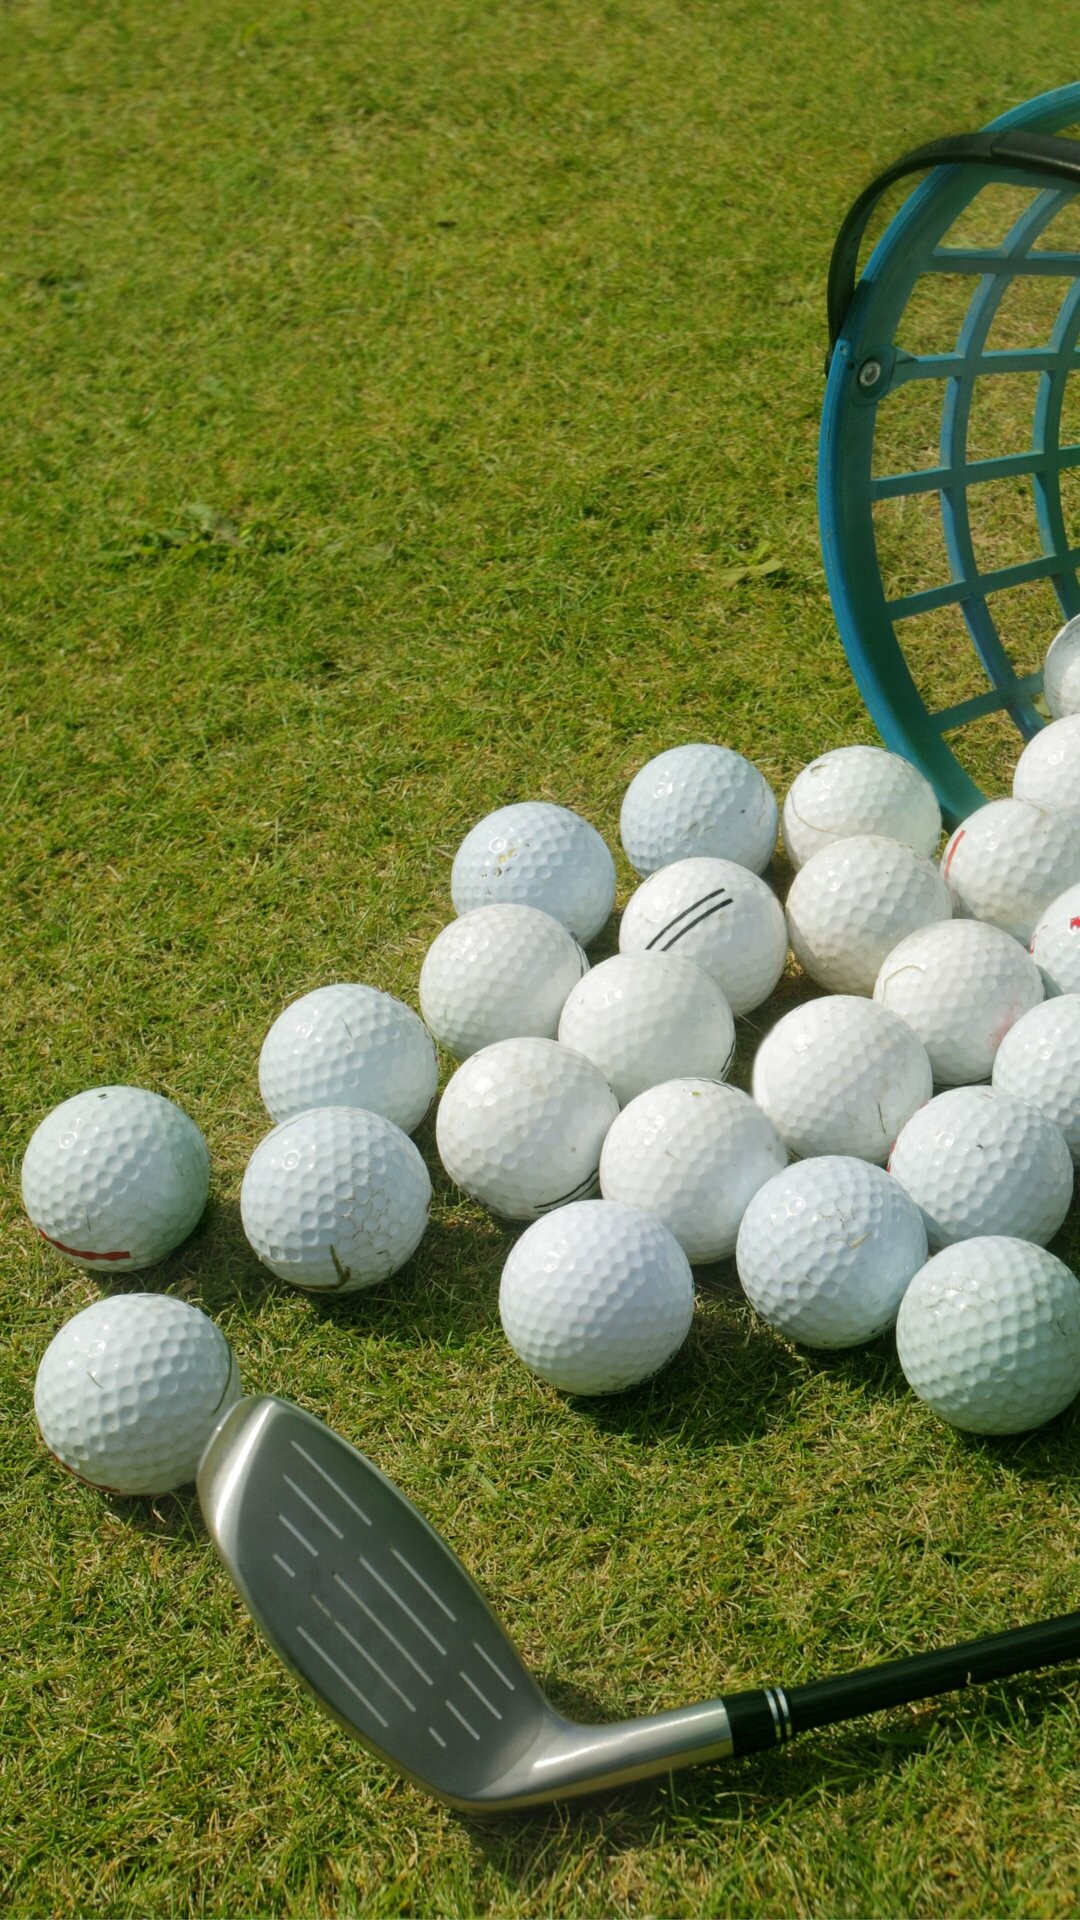 Golf: A club-and-ball sport, Course, Cup. 1080x1920 Full HD Wallpaper.